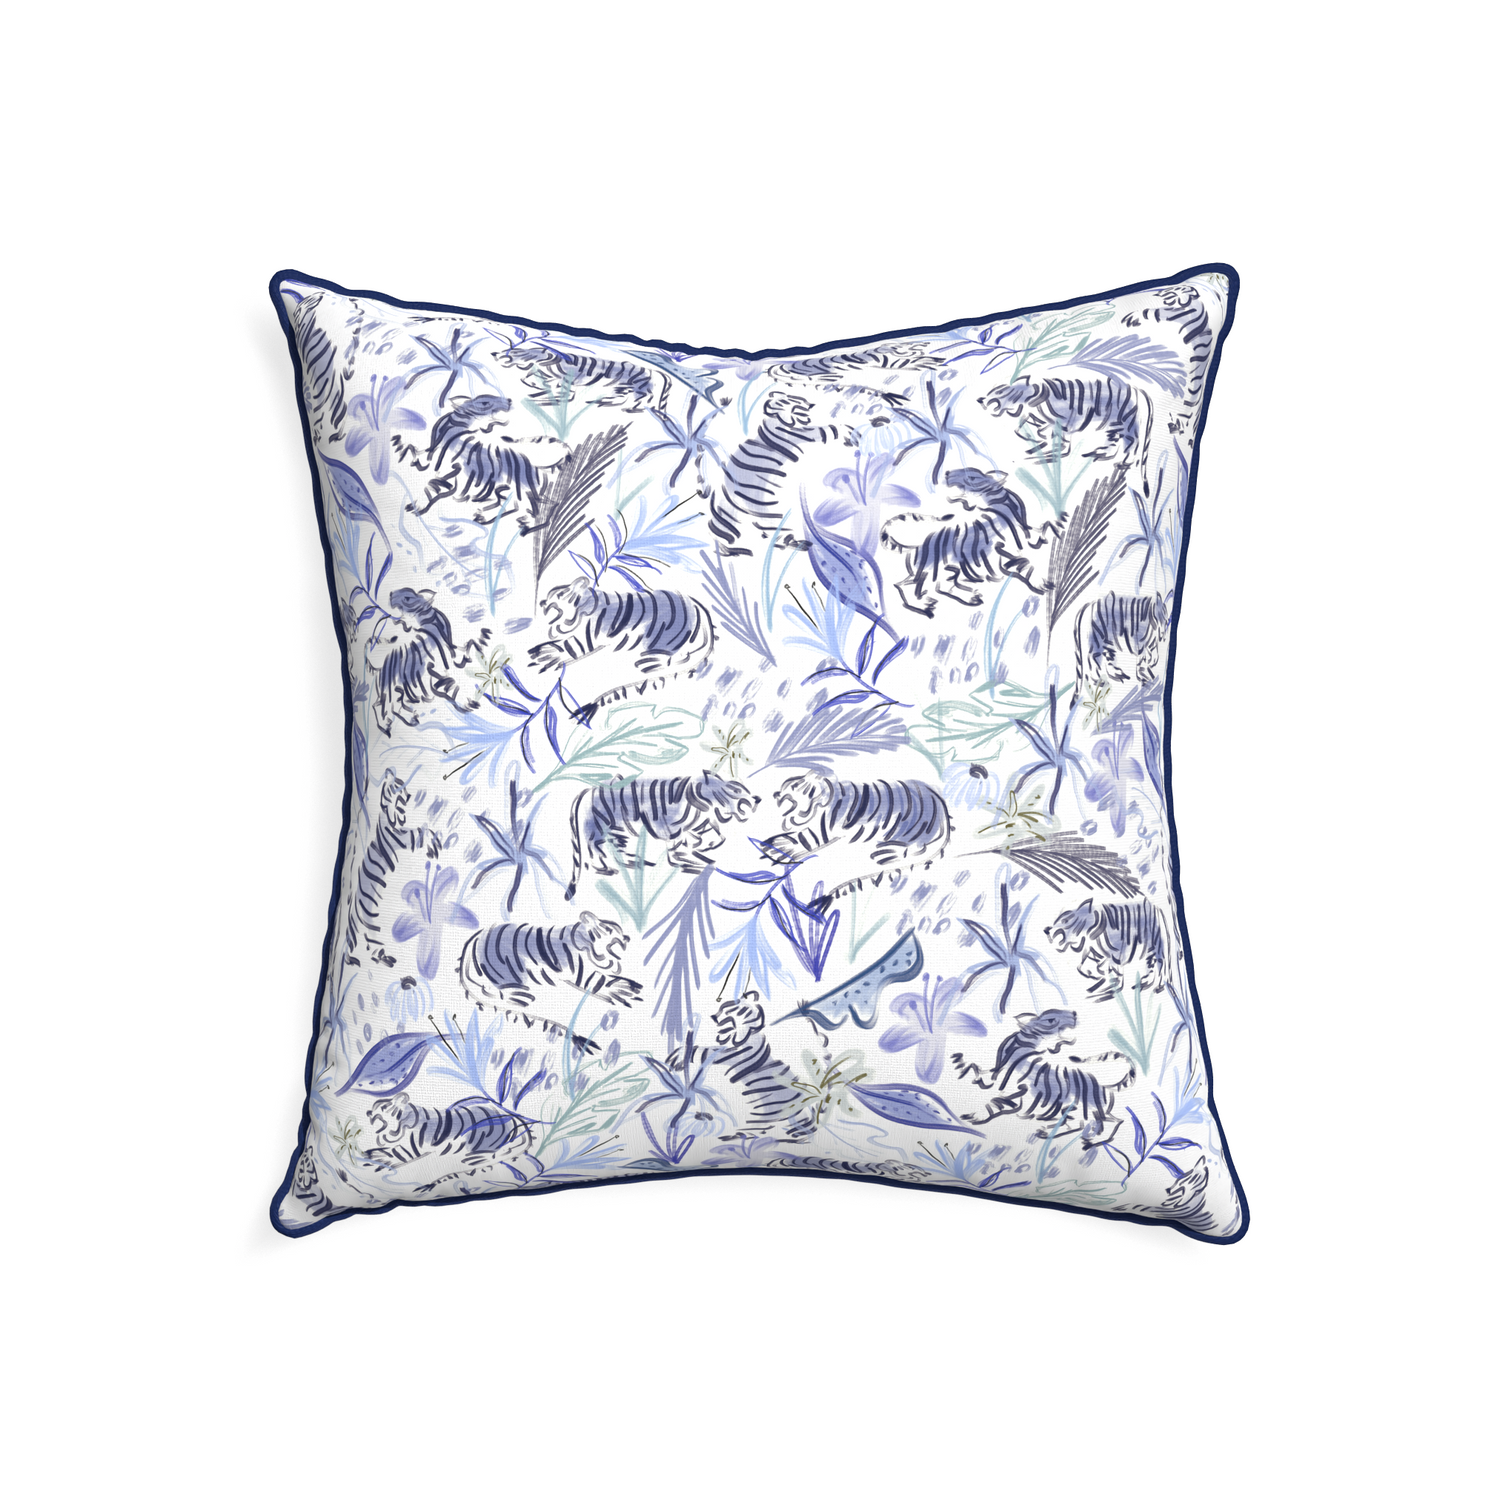 22-square frida blue custom blue with intricate tiger designpillow with midnight piping on white background